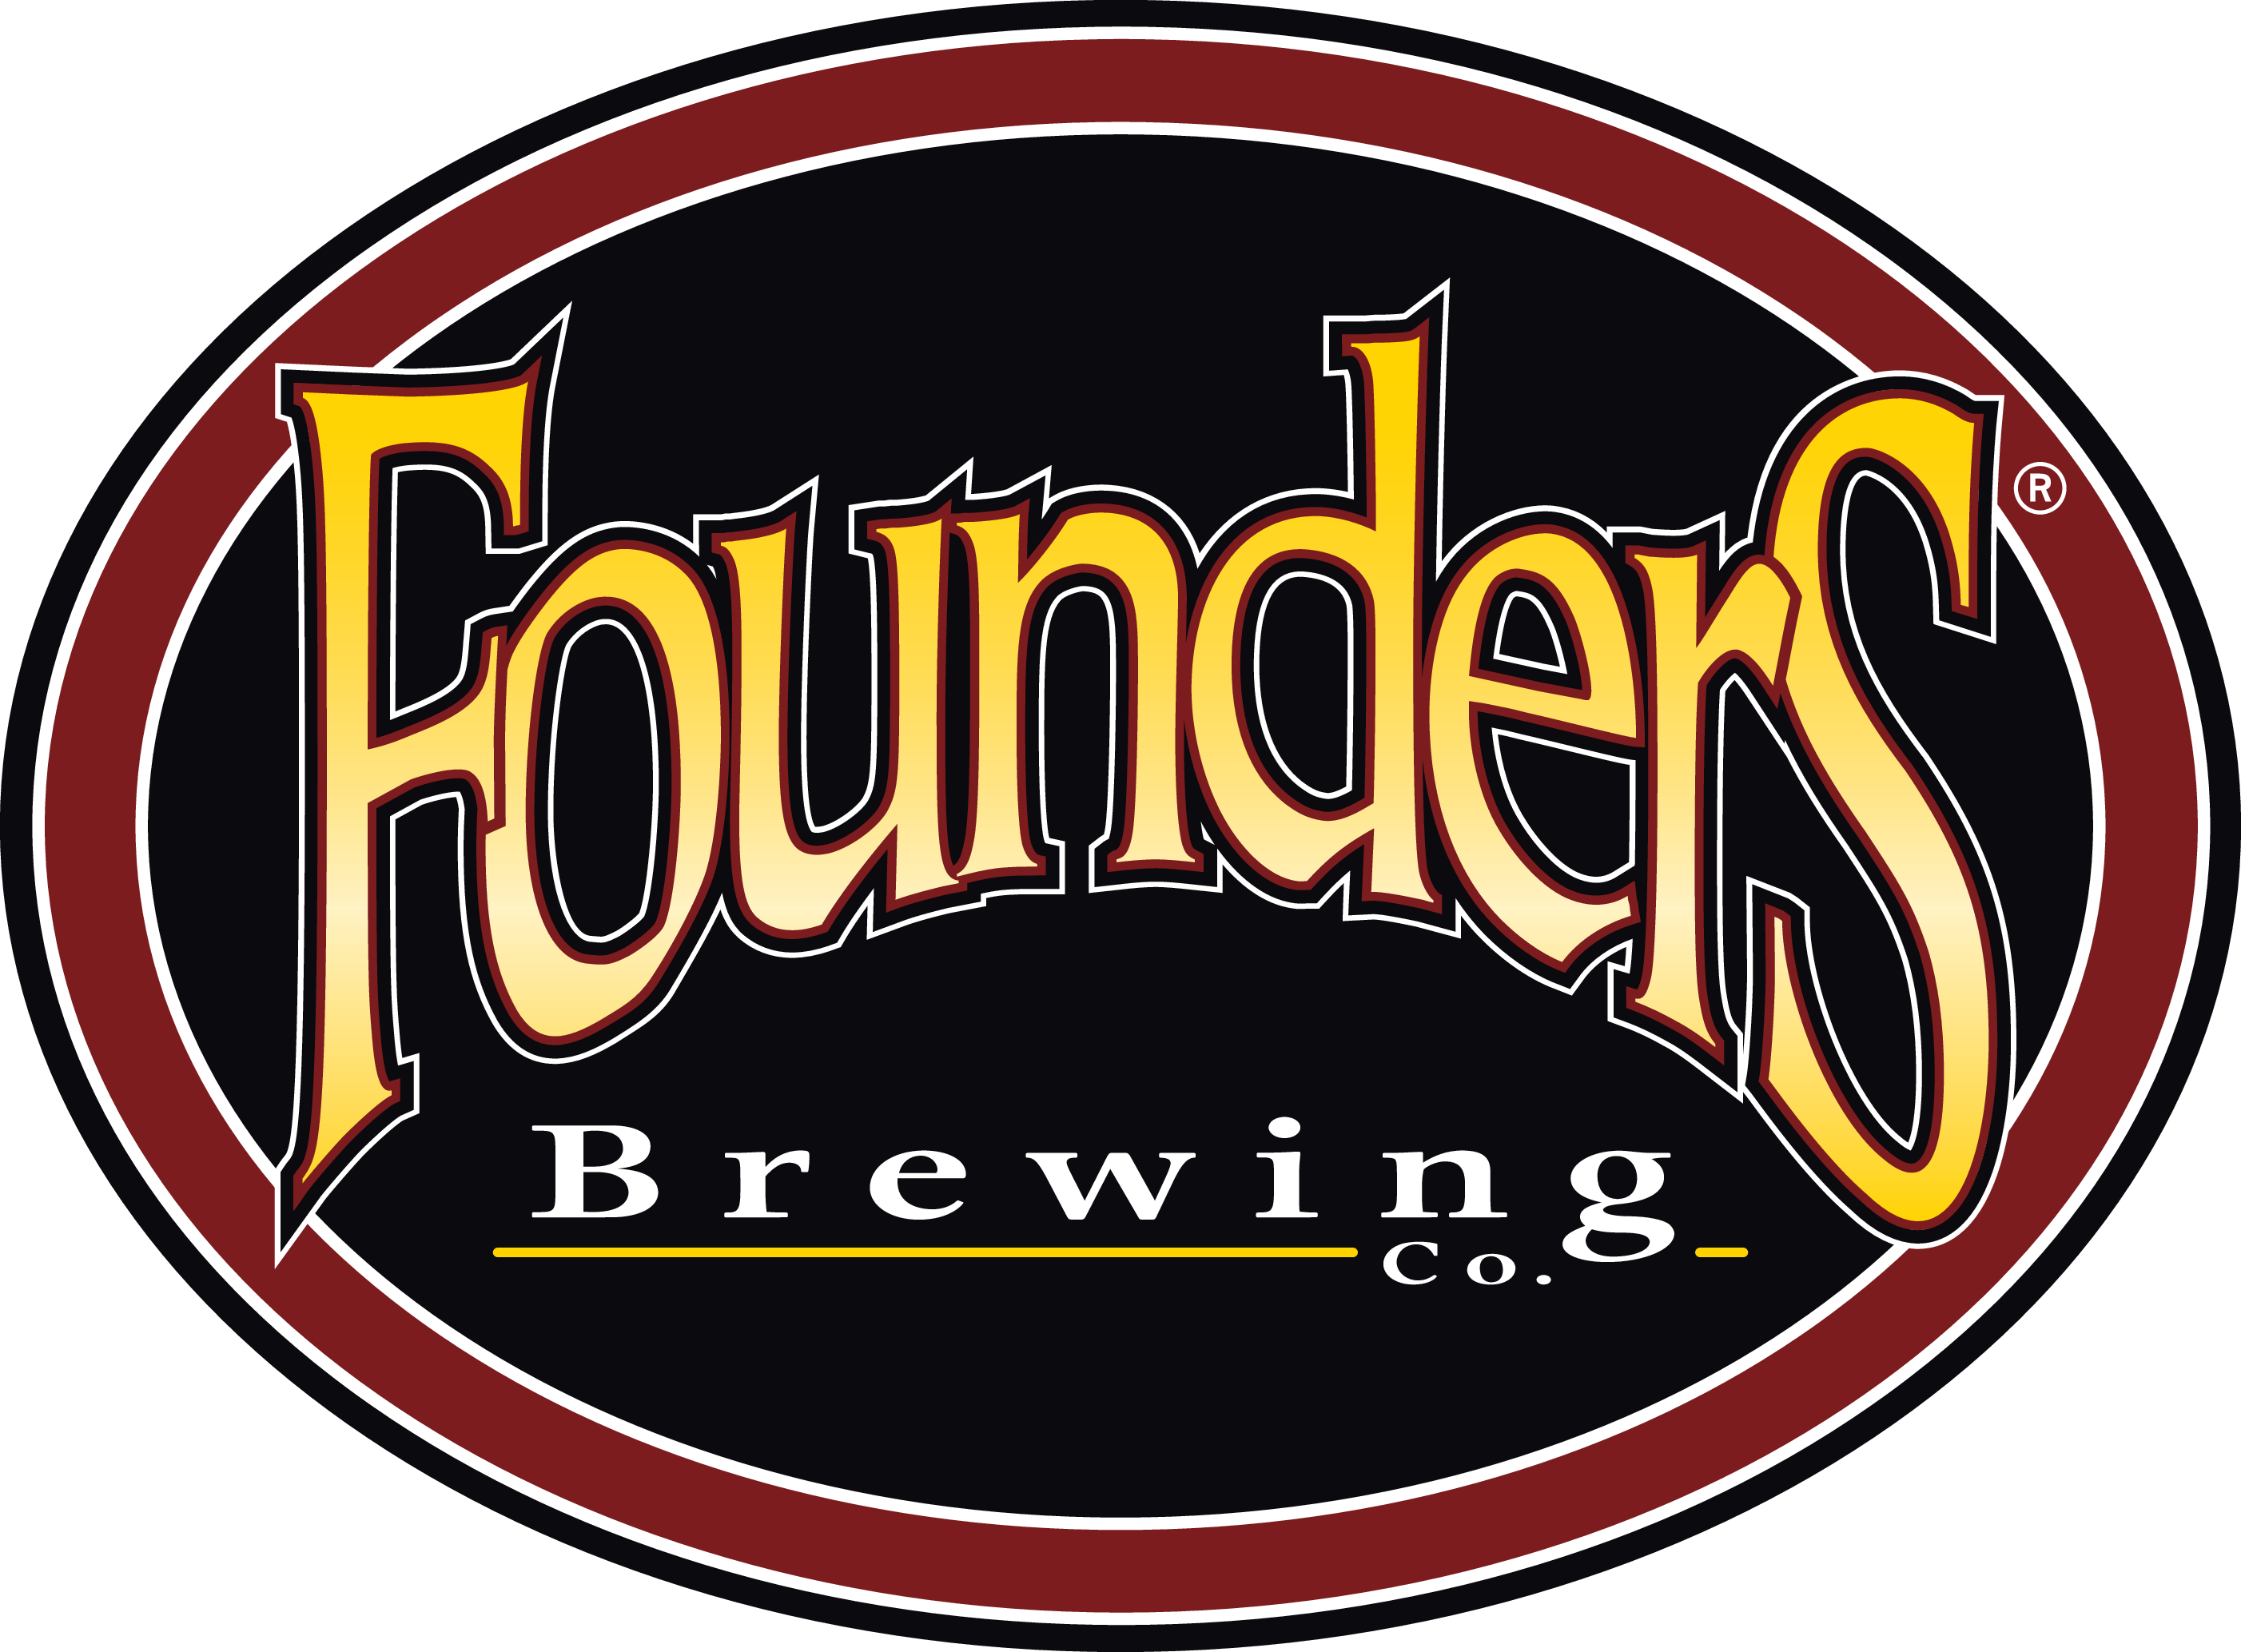 Founders Brewing Co.